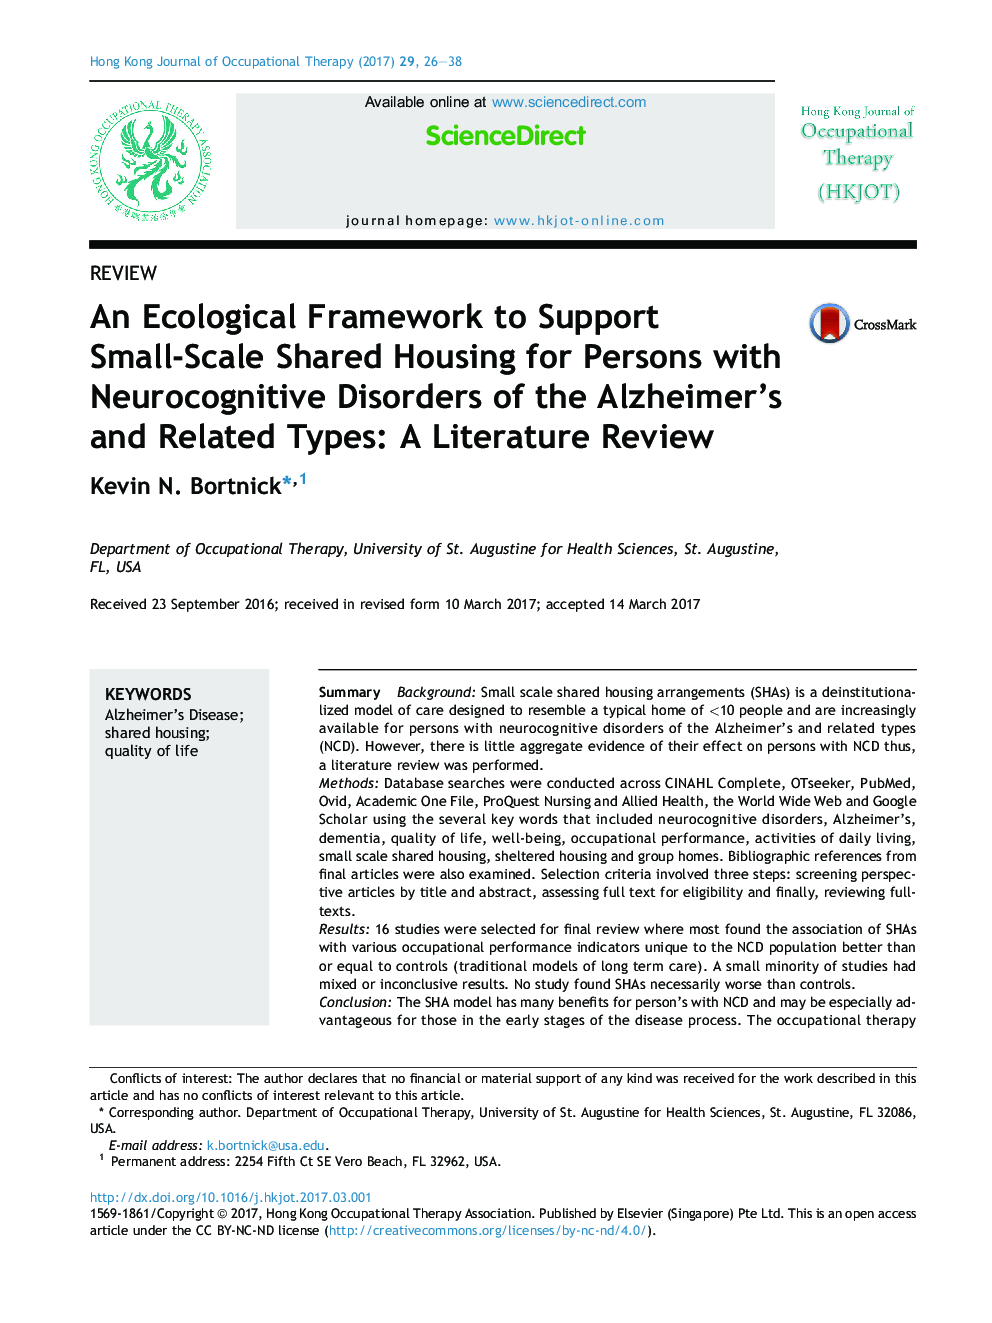 An Ecological Framework to Support Small-Scale Shared Housing for Persons with Neurocognitive Disorders of the Alzheimer's and Related Types: A Literature Review